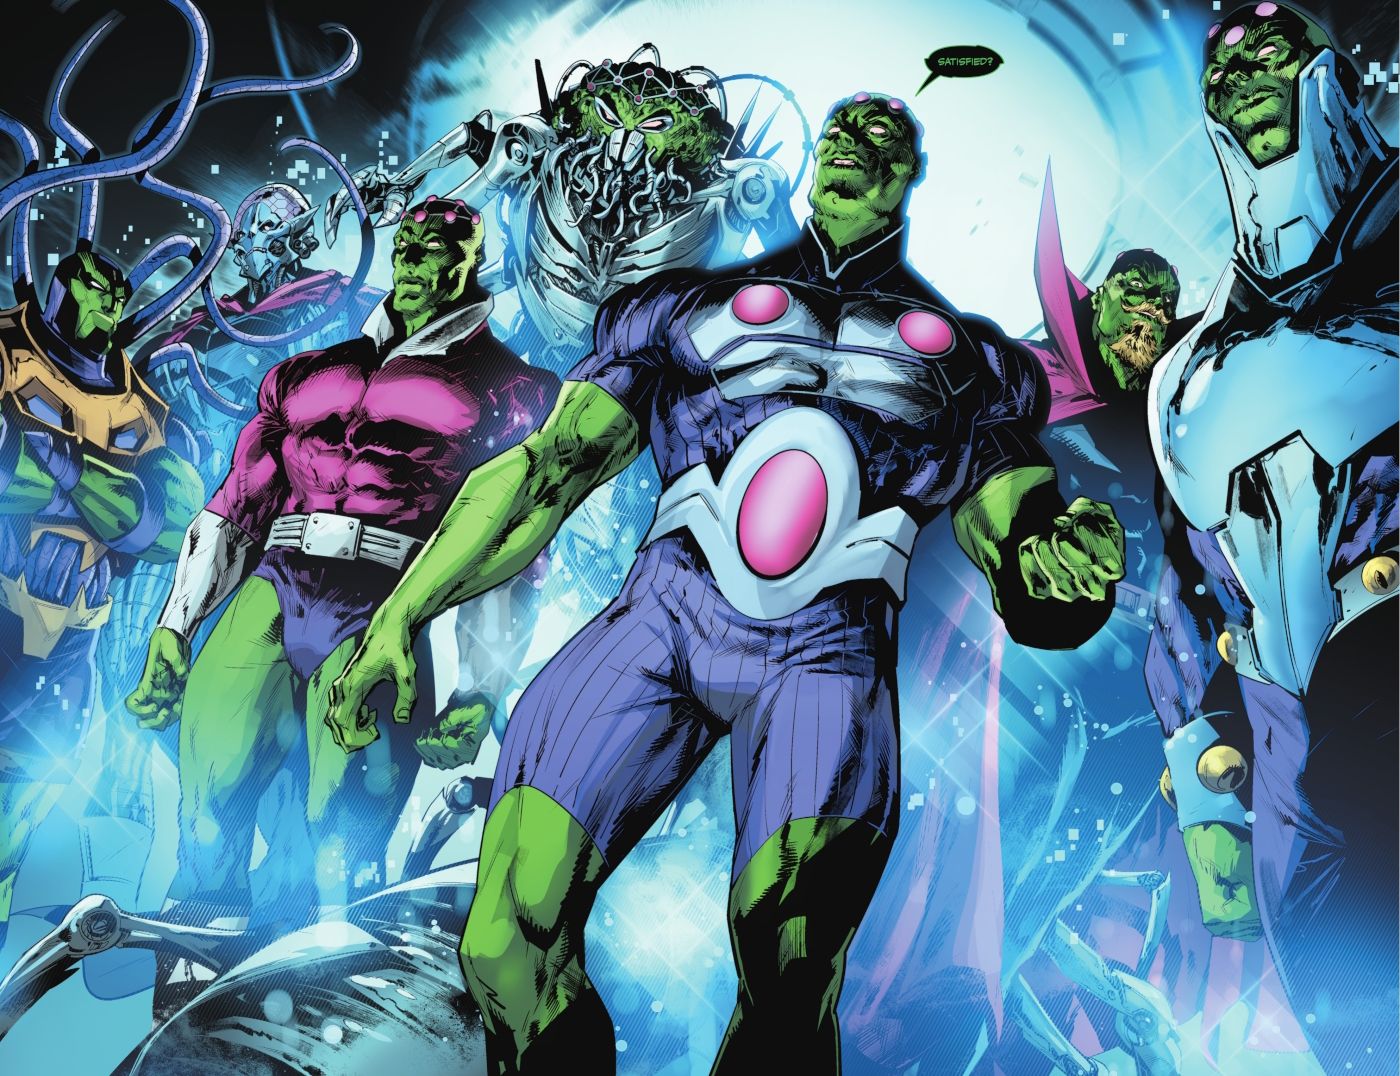 Comic book panel: The Light Is Revealed As The Council Of Brainiacs